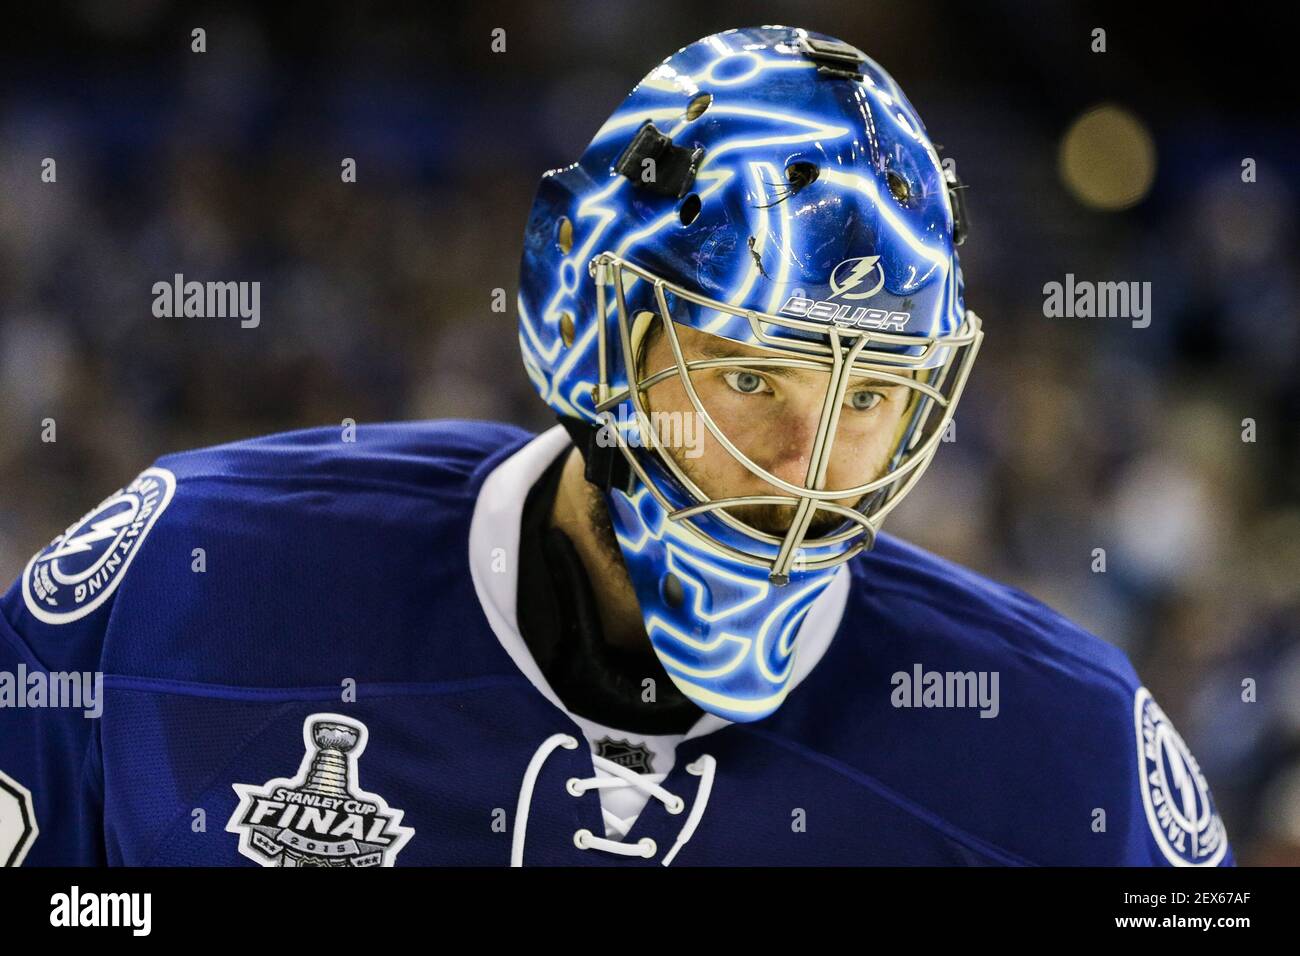 Tampa, USA. 12th Jan, 2017. Tampa Bay Lightning goalie Ben Bishop (30) in  net during second period action at the Amalie Arena in Tampa. Bishop had  been out several weeks due to